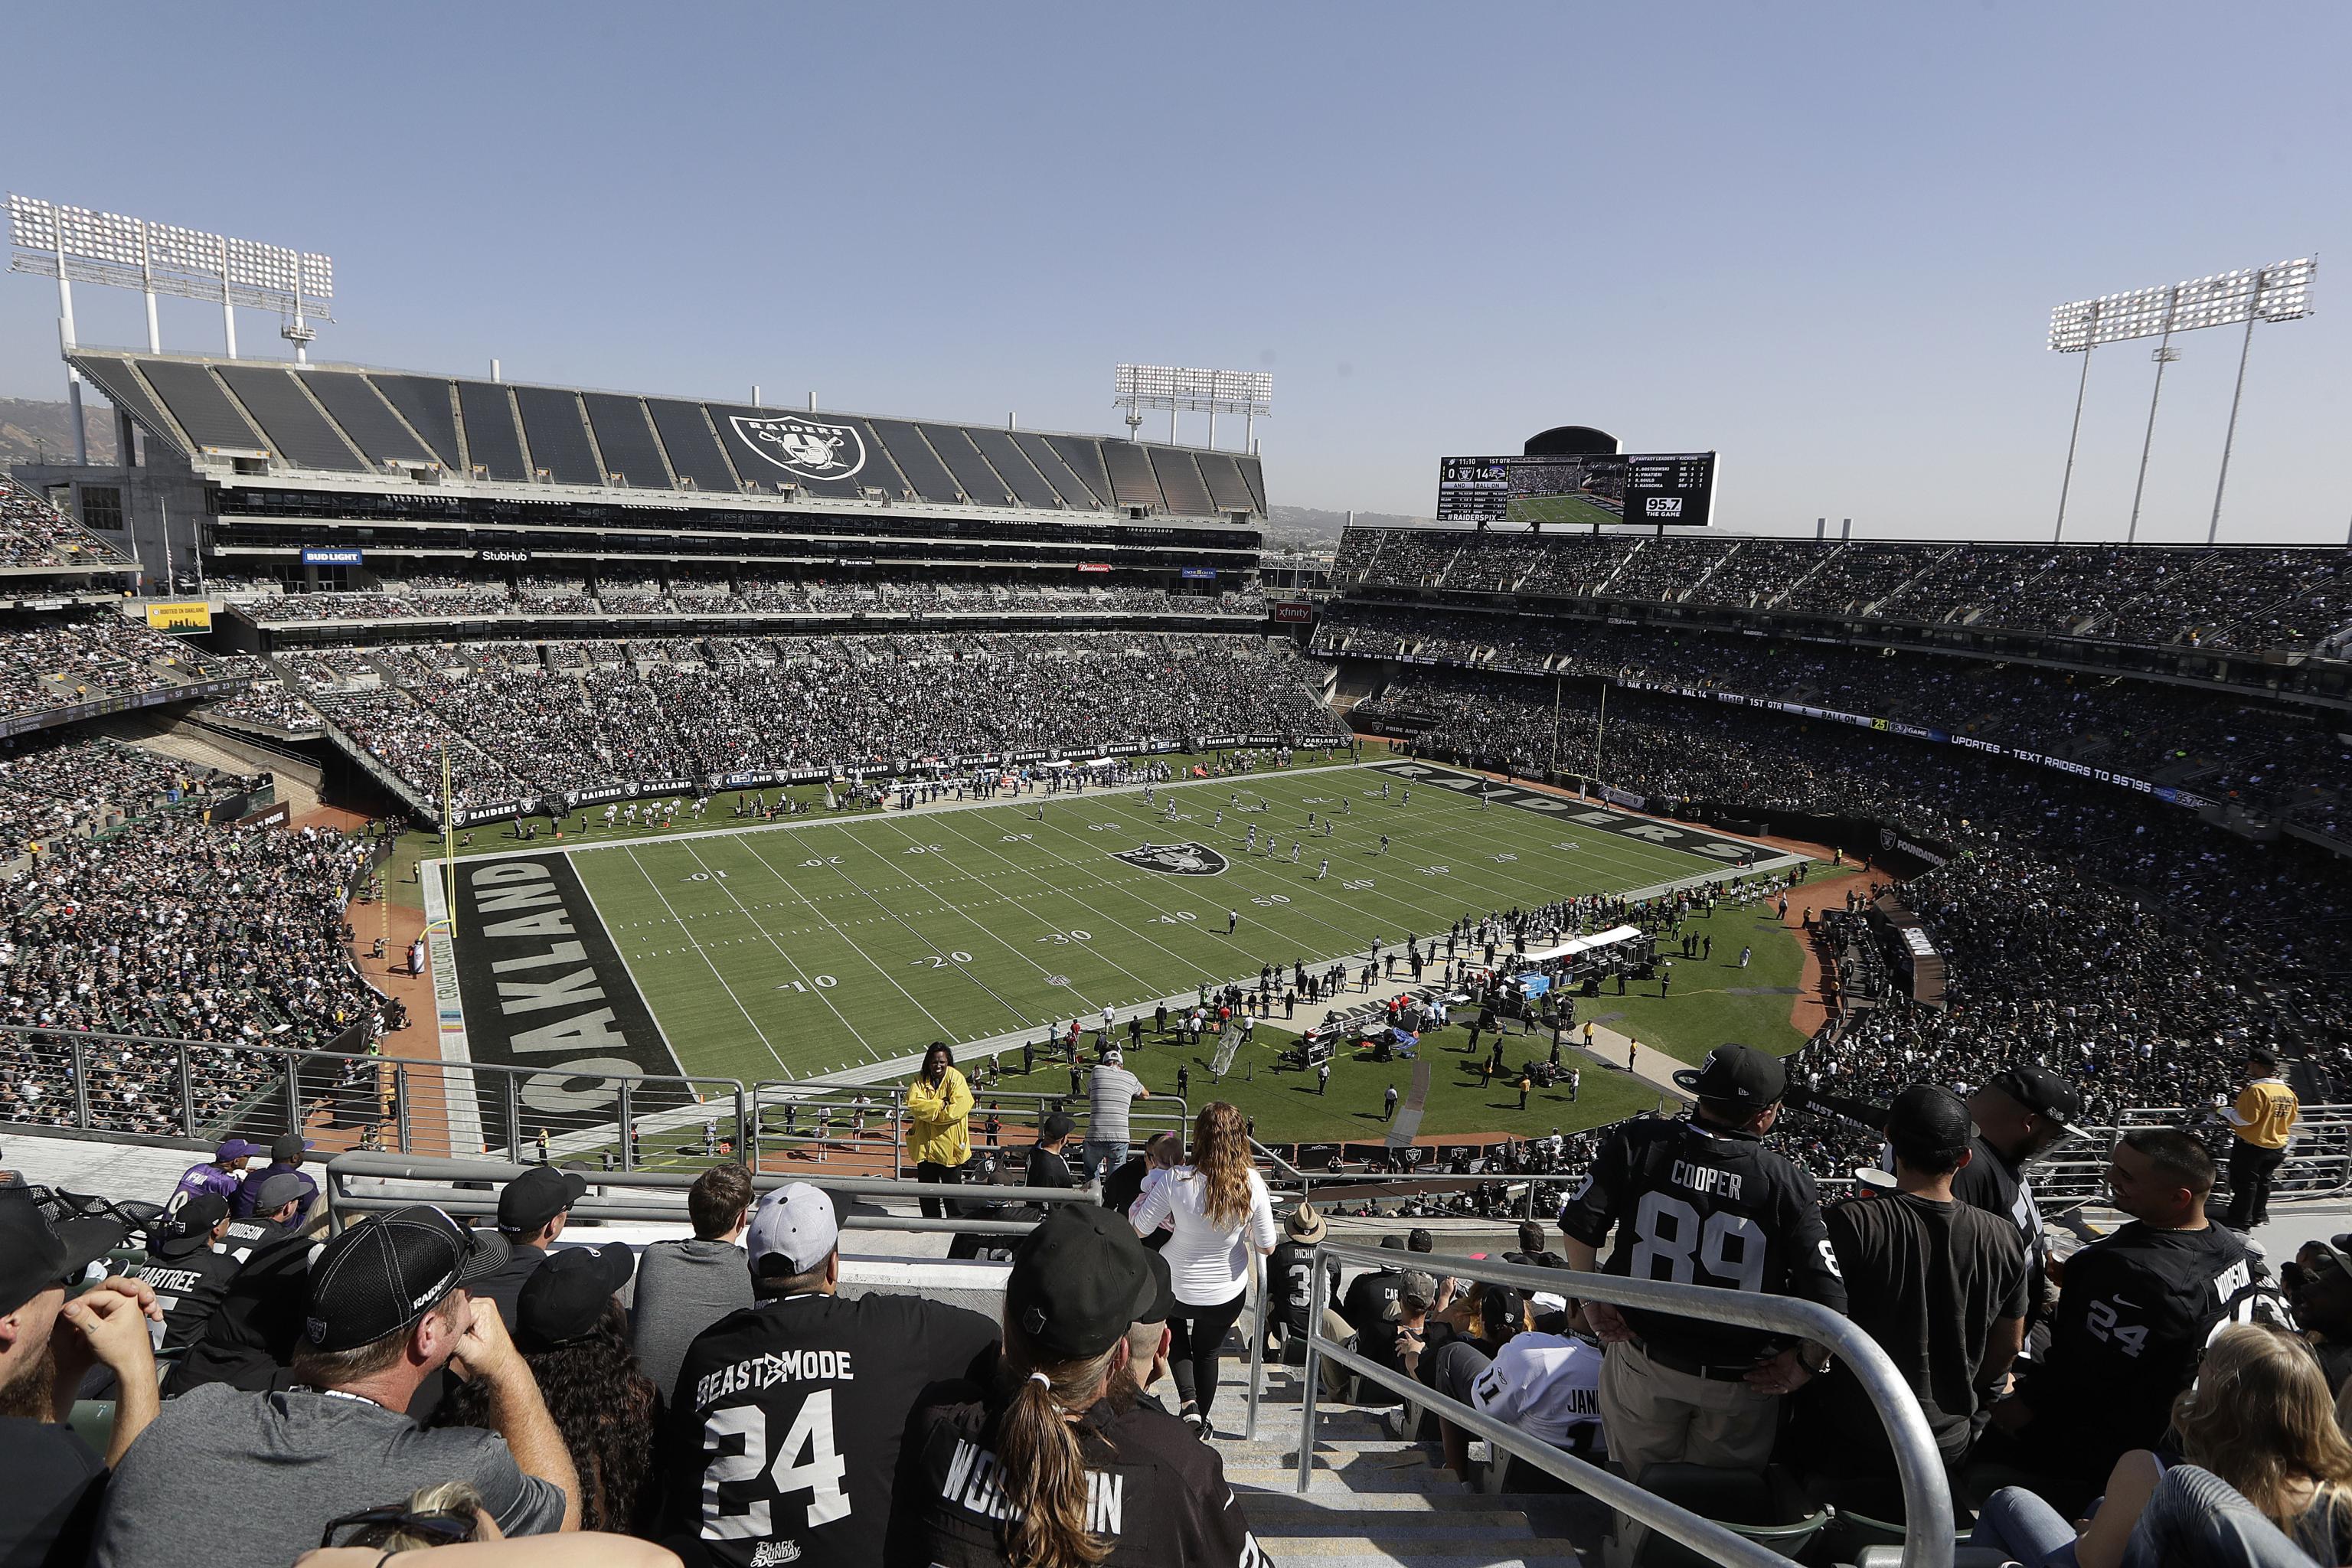 Raiders vs. Chargers Reportedly Could Be Moved Due to Smoke from